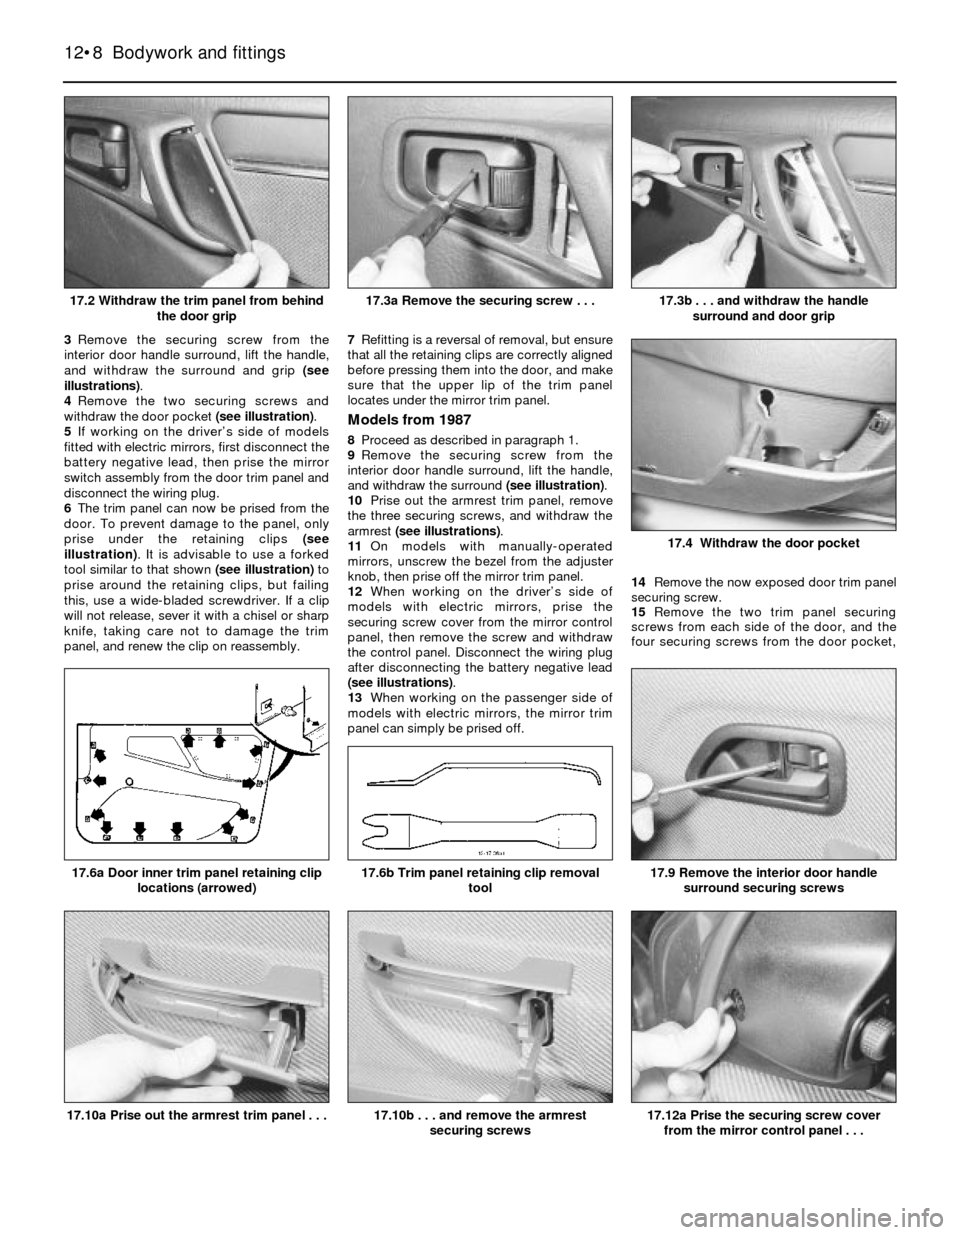 FORD SIERRA 1992 2.G Bodywork And Fittings Workshop Manual 3Remove the securing screw from the
interior door handle surround, lift the handle,
and withdraw the surround and grip (see
illustrations).
4Remove the two securing screws and
withdraw the door pocket